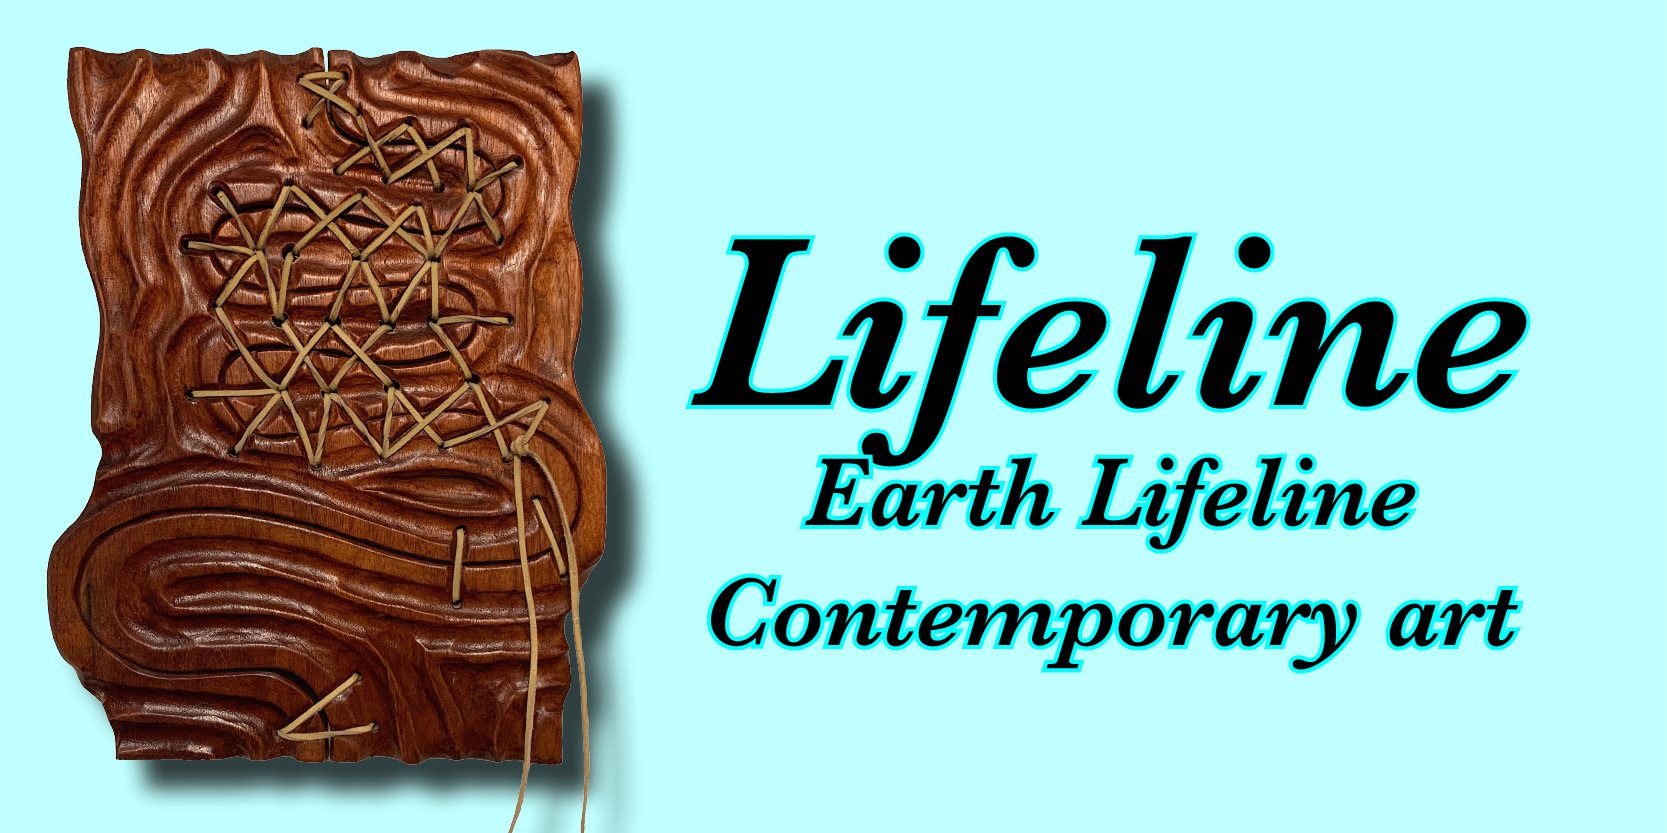 Climate change art, Lifeline of the Earth, Butternut wood, darkwood woodcarving, dwcarving, wood carving